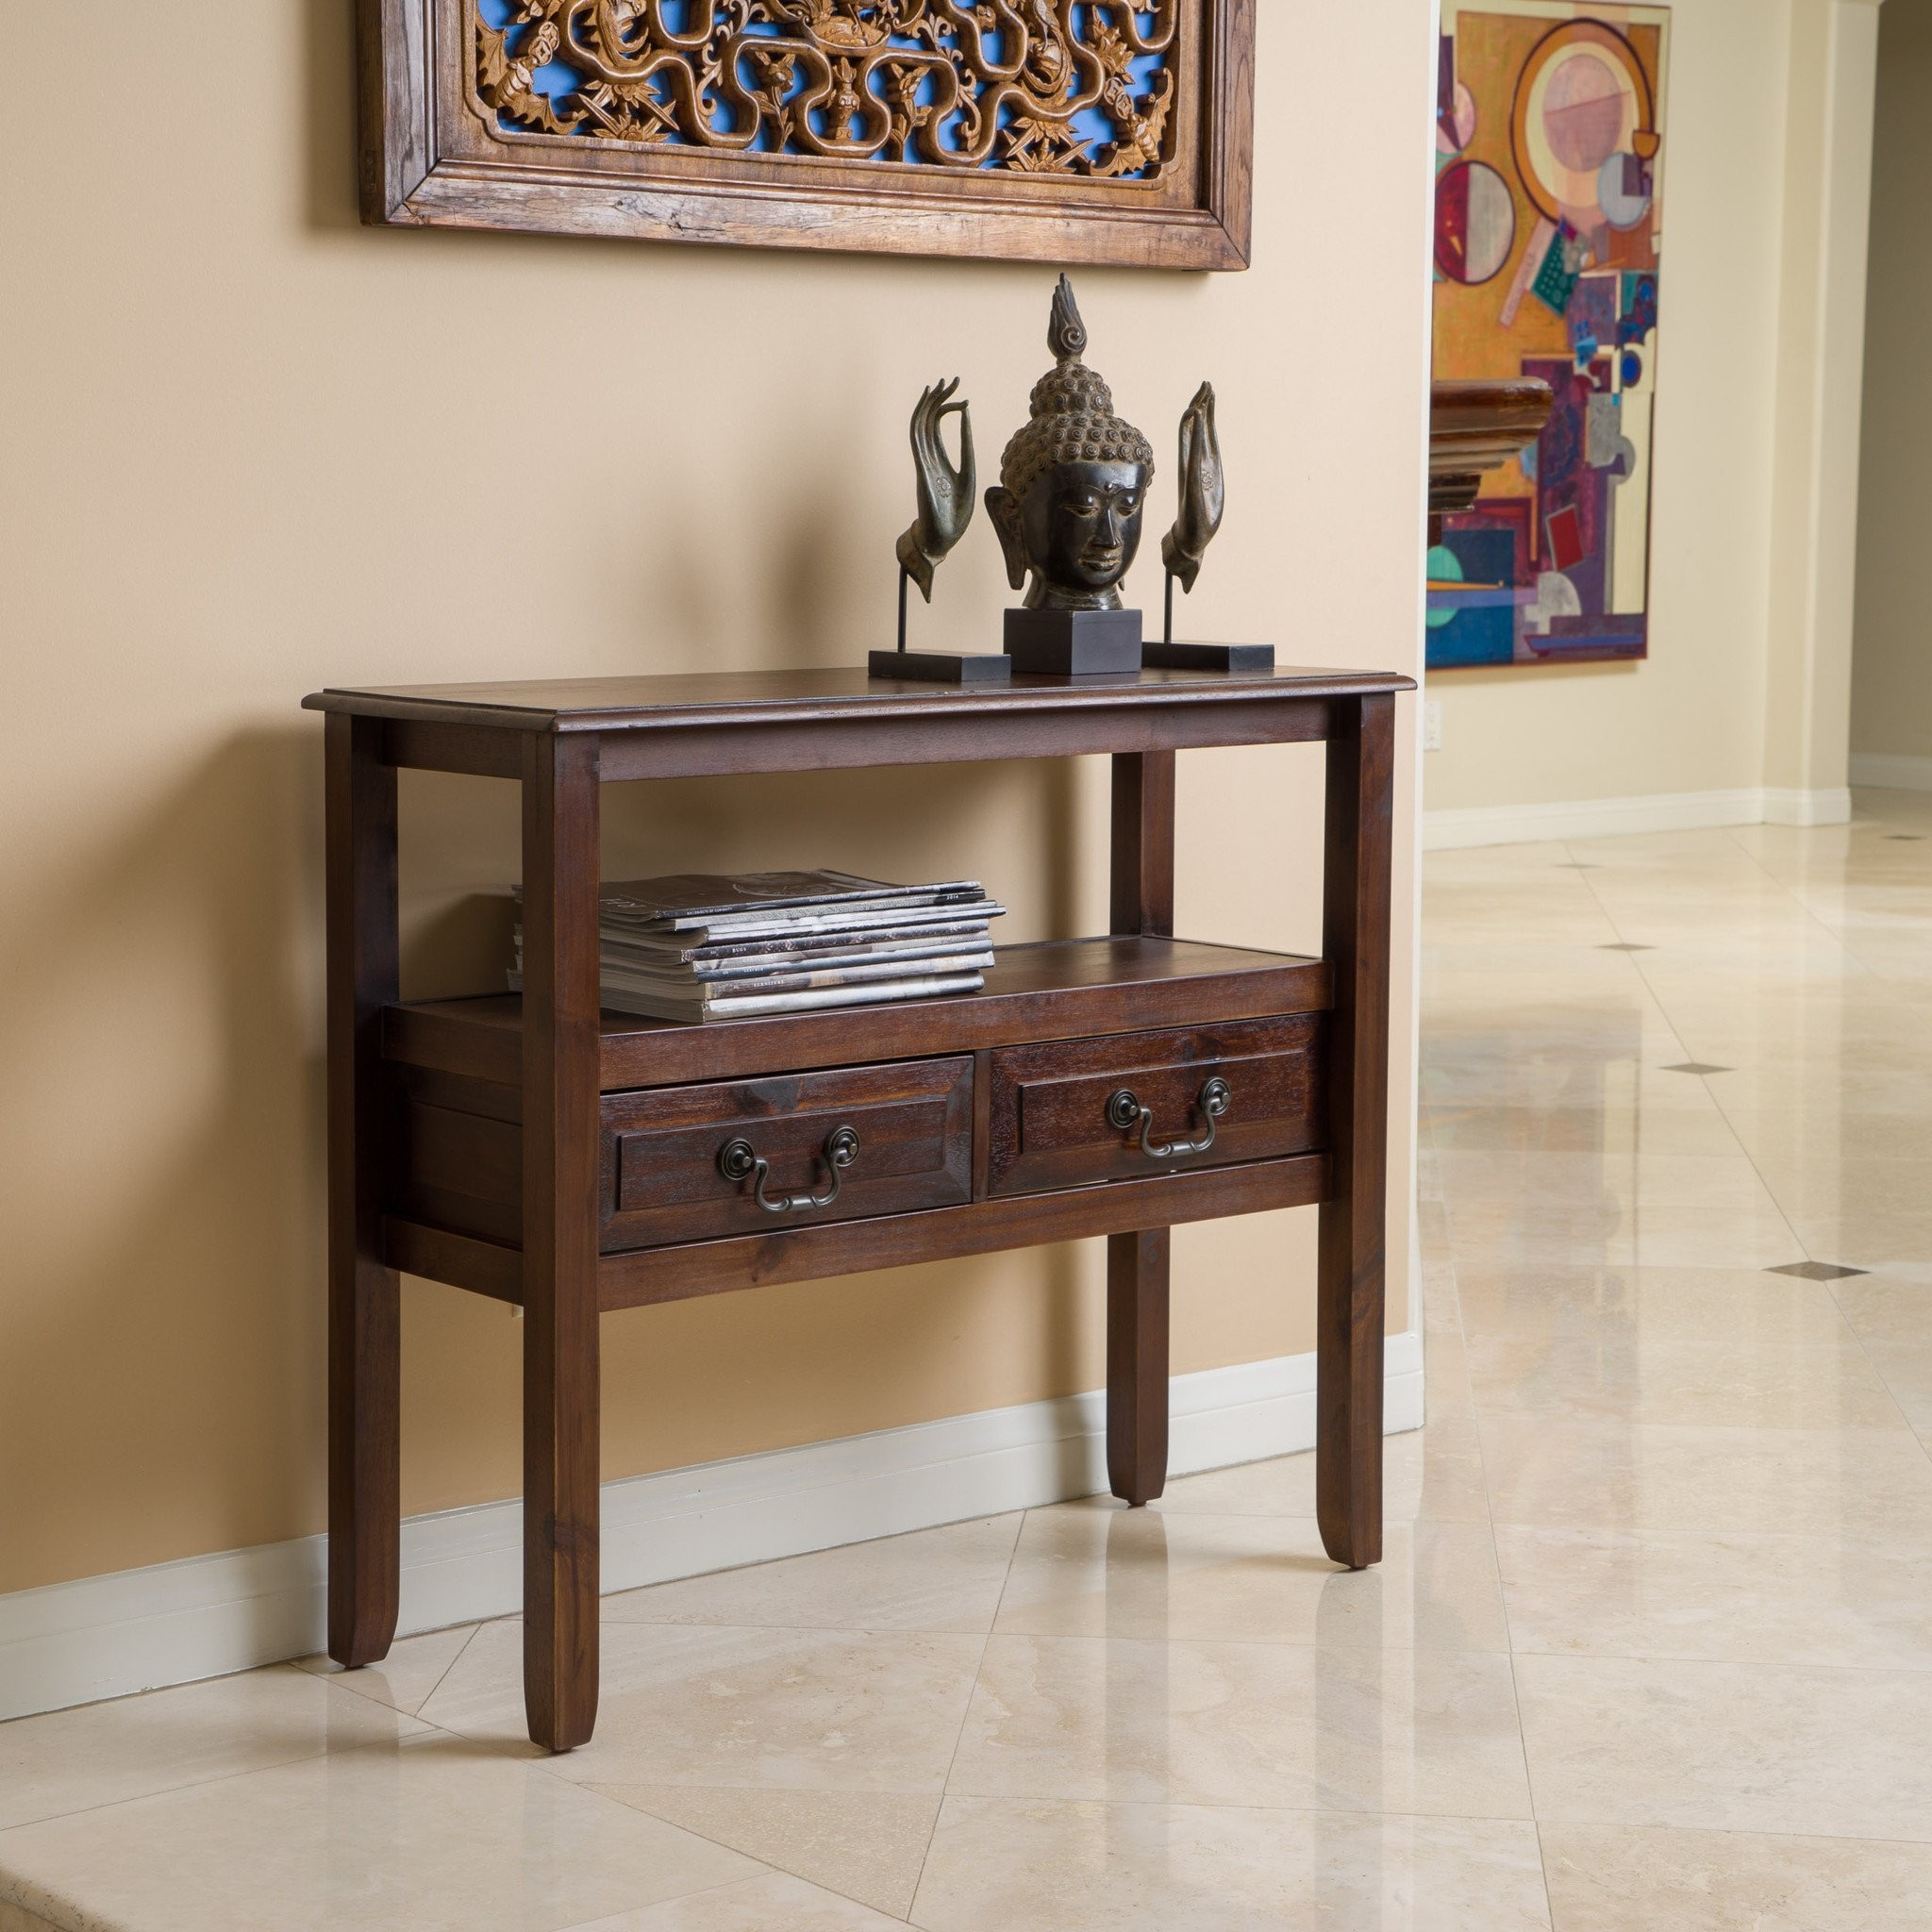 Madeline Home Grant Acacia Wood Accent Table